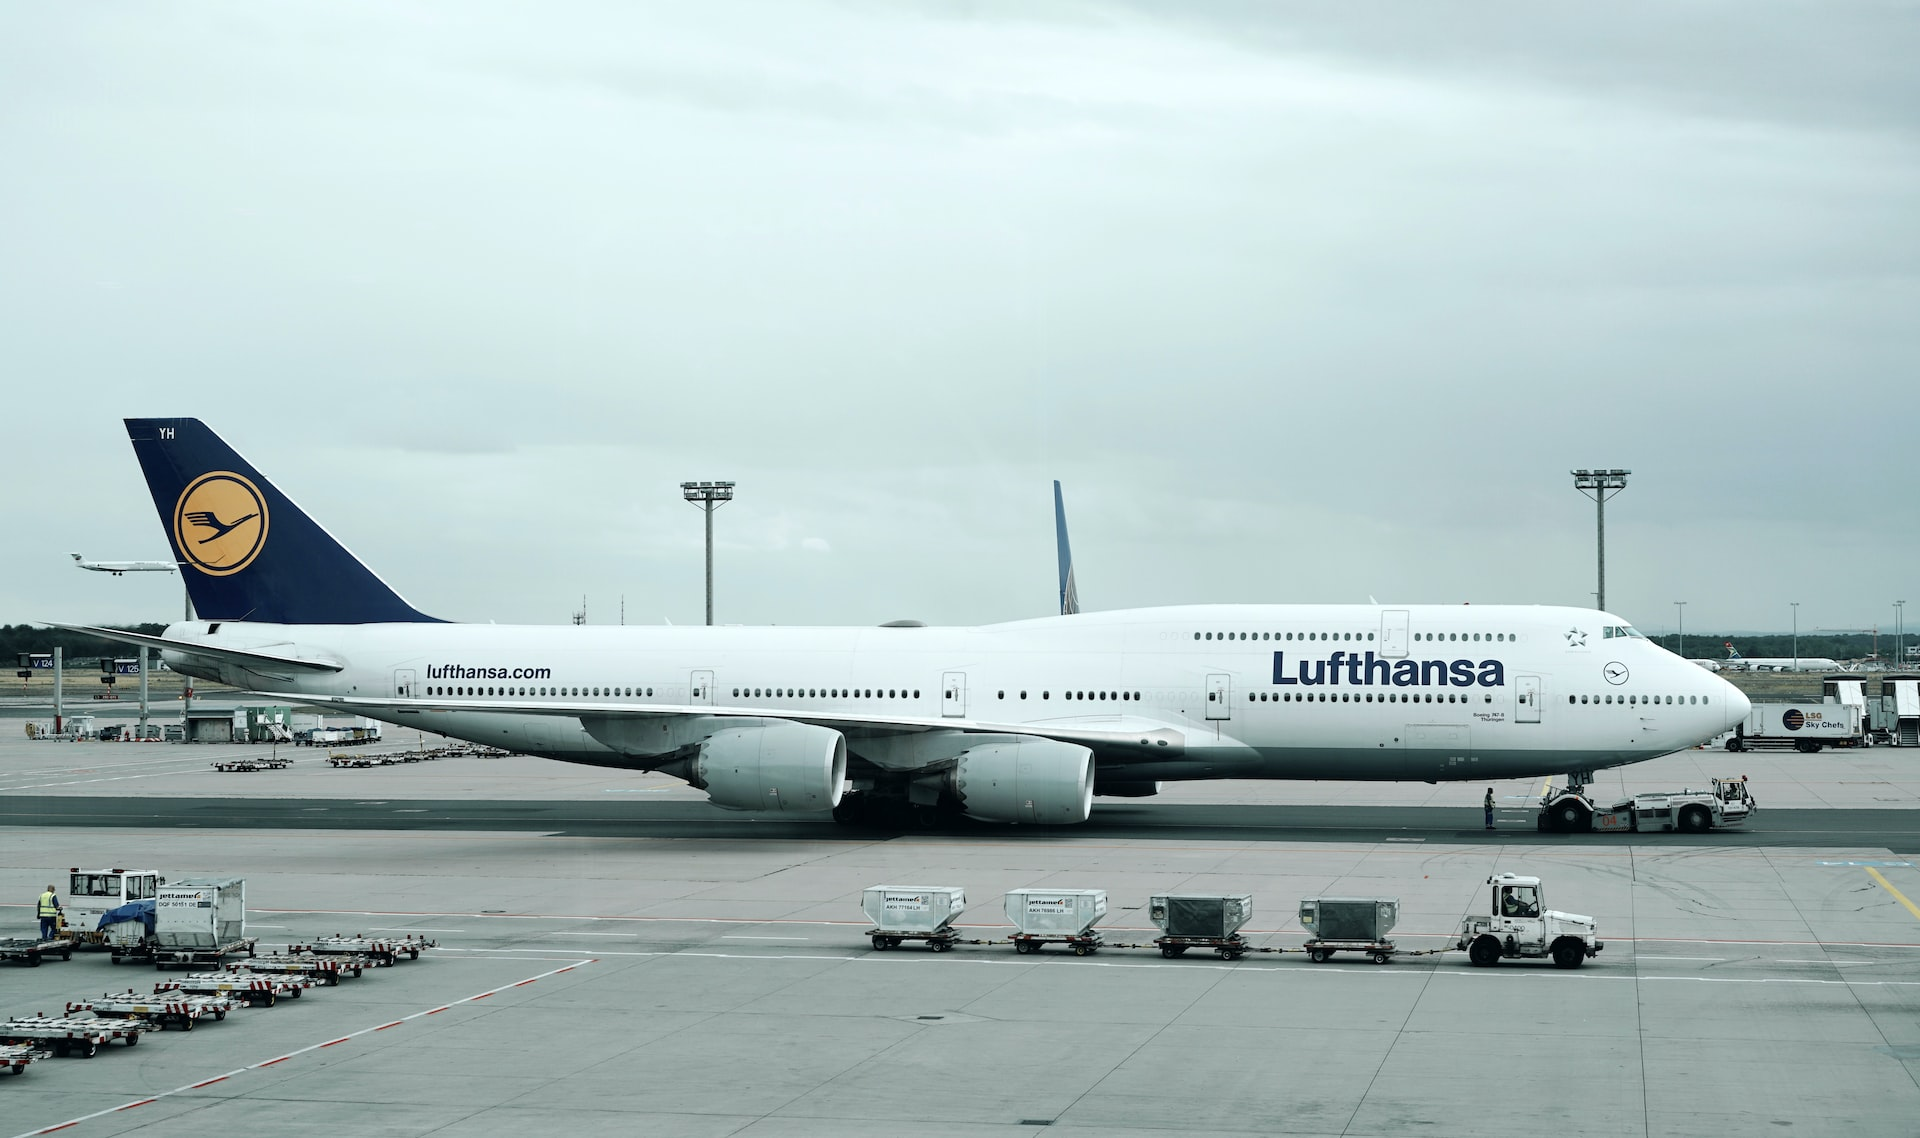 A Boeing 747 of Lufthansa parked at an airport.